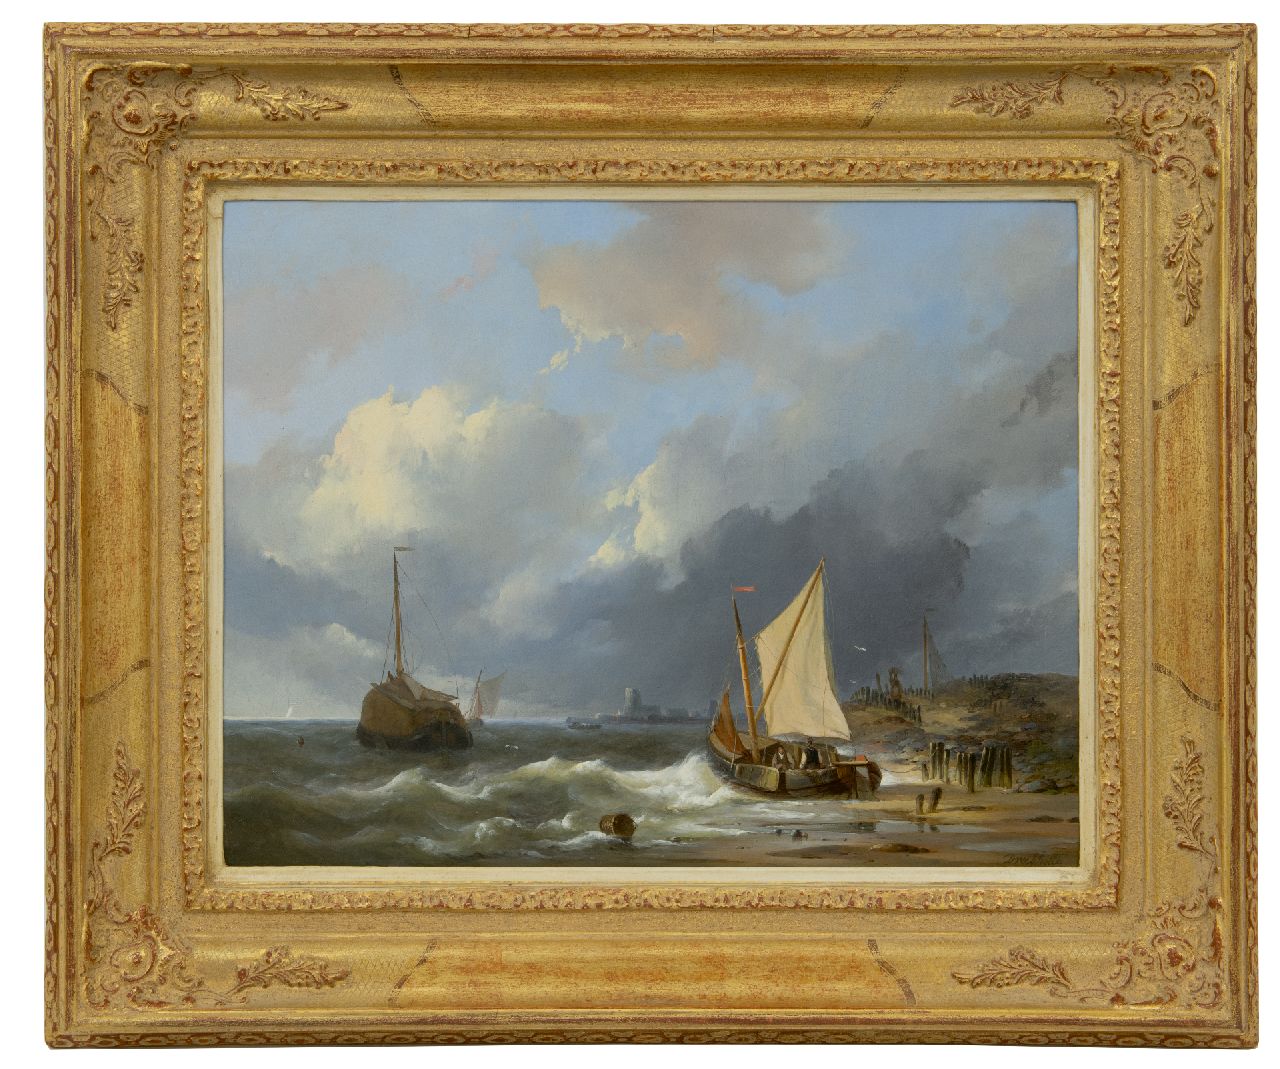 Dreibholtz C.L.W.  | Christiaan Lodewijk Willem Dreibholtz | Paintings offered for sale | Ships on the Zuiderzee, oil on panel 41.2 x 52.8 cm, signed l.r.